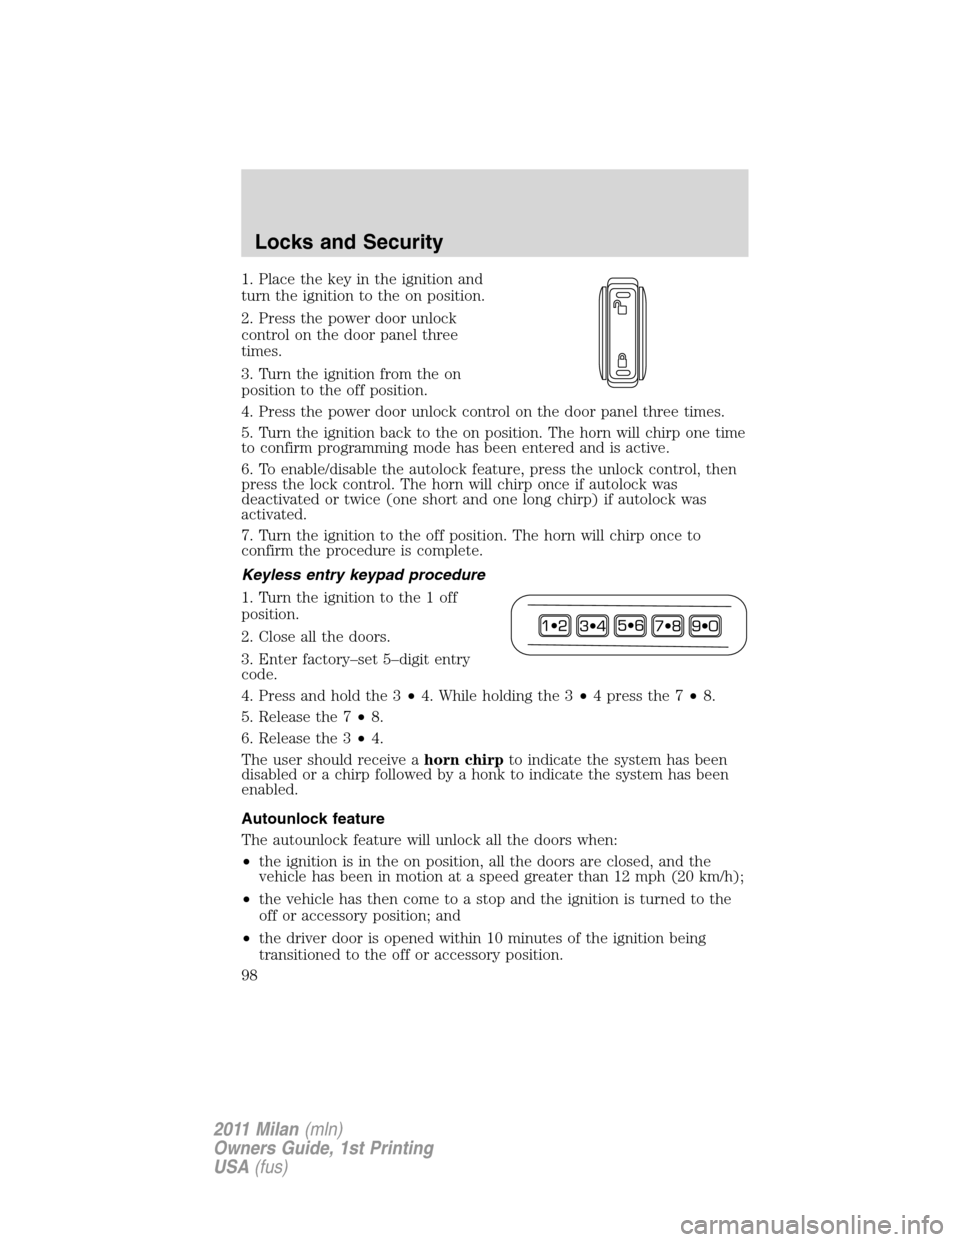 Mercury Milan 2011  Owners Manuals 1. Place the key in the ignition and
turn the ignition to the on position.
2. Press the power door unlock
control on the door panel three
times.
3. Turn the ignition from the on
position to the off po